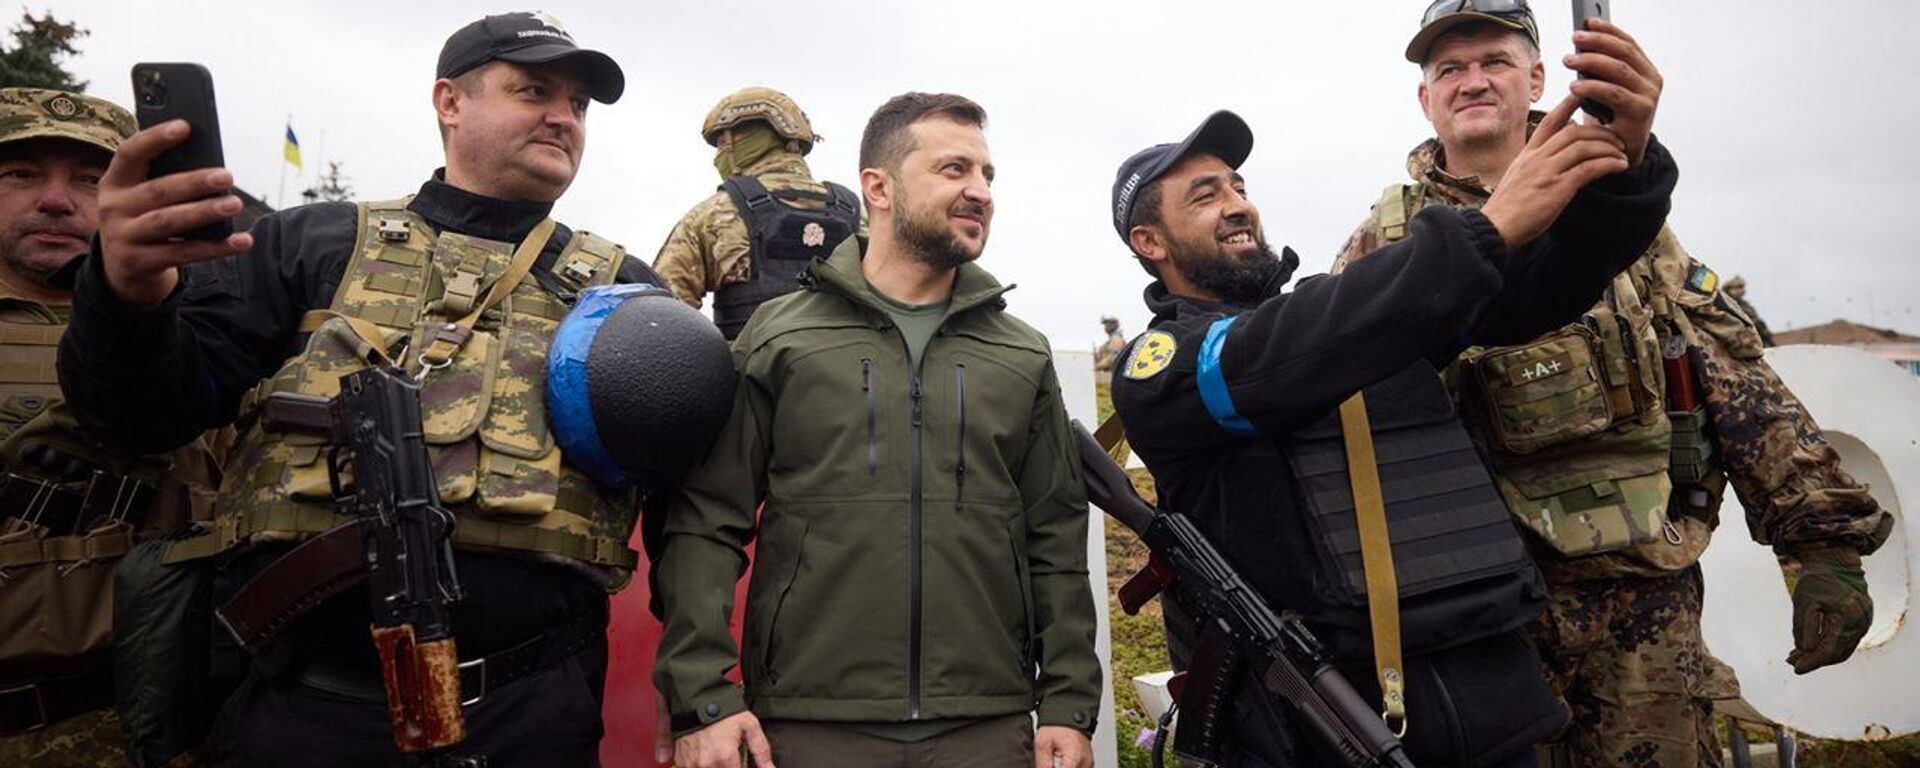 Ukrainian President Volodymyr Zelensky poses with soldiers, including a trooper wearing an SS-Totenkopf badge, during a visit to Kharkov region. - Sputnik International, 1920, 14.09.2022